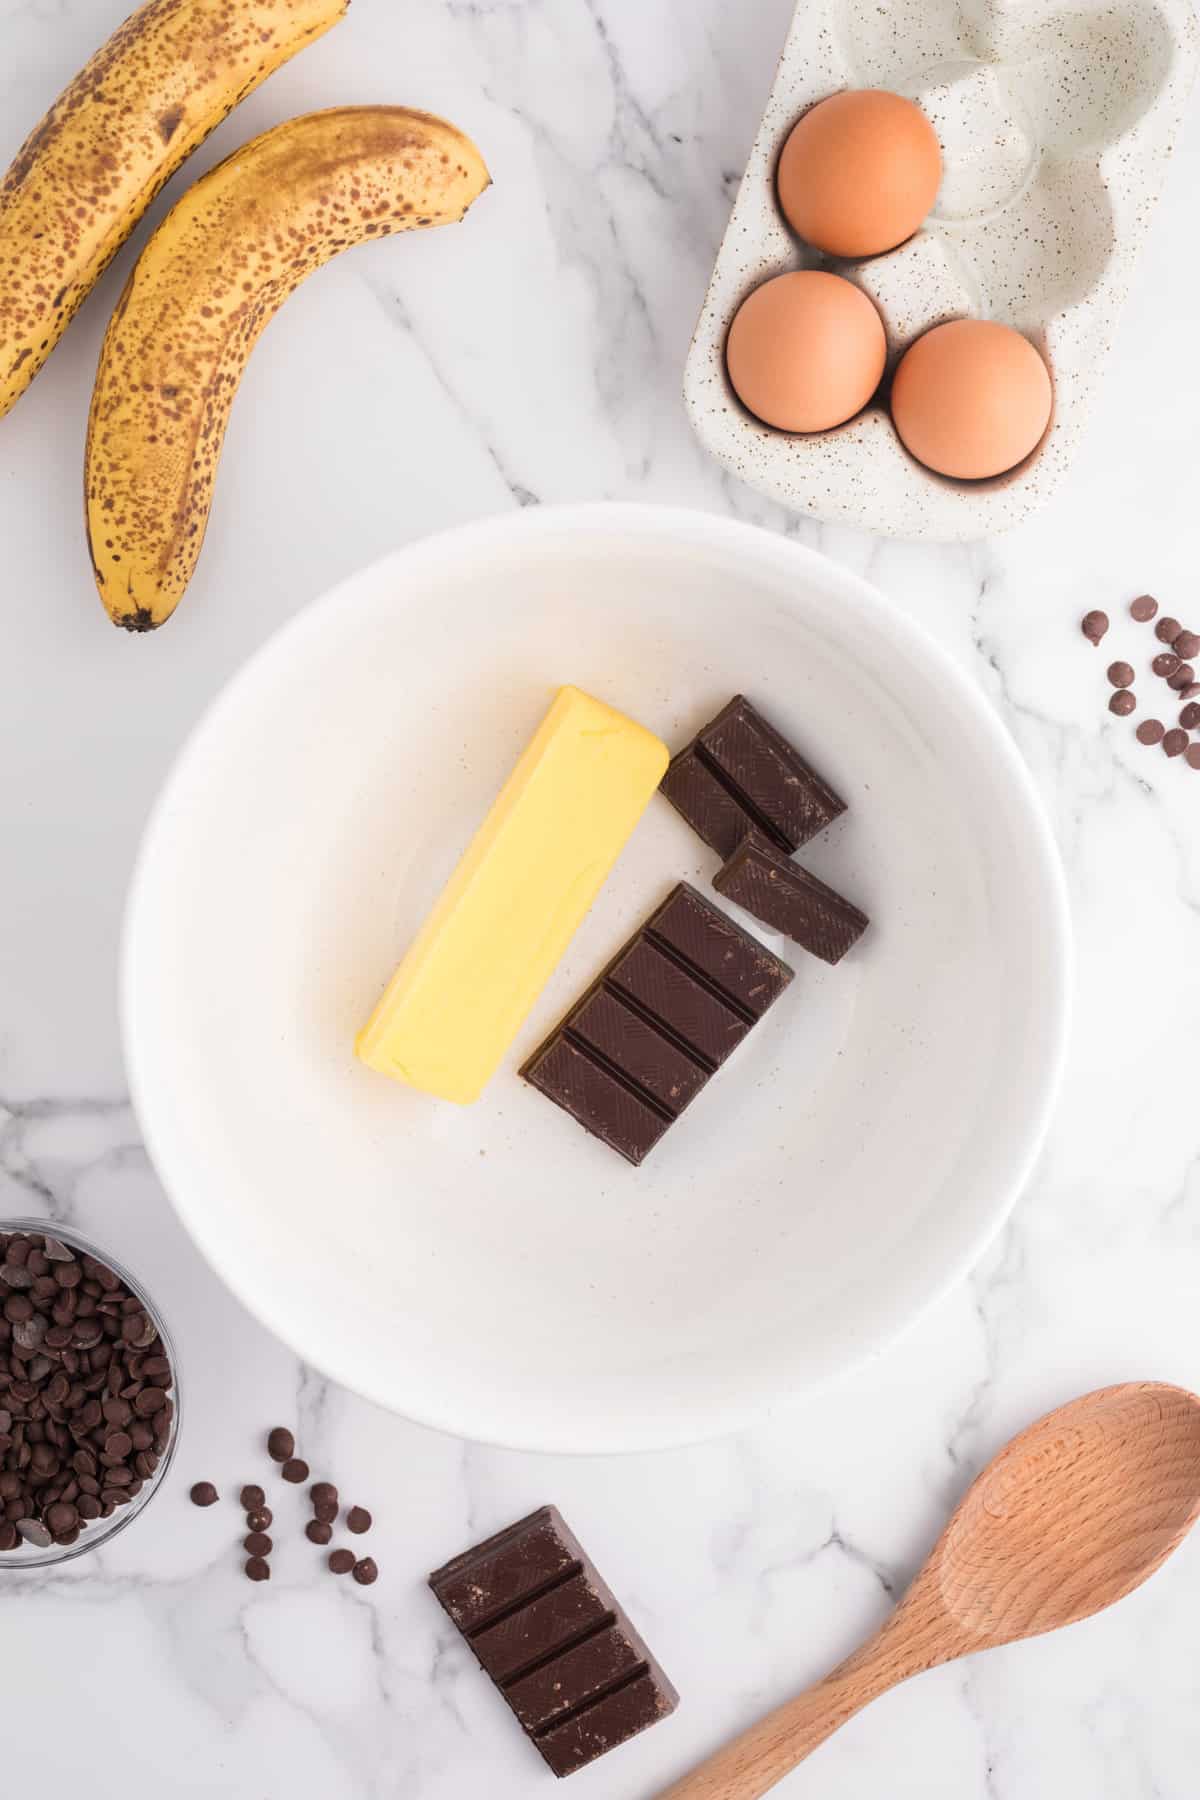 butter and semi sweet chocolate in a bowl surrounded by bananas, eggs, a wooden spoon and chocolate chips